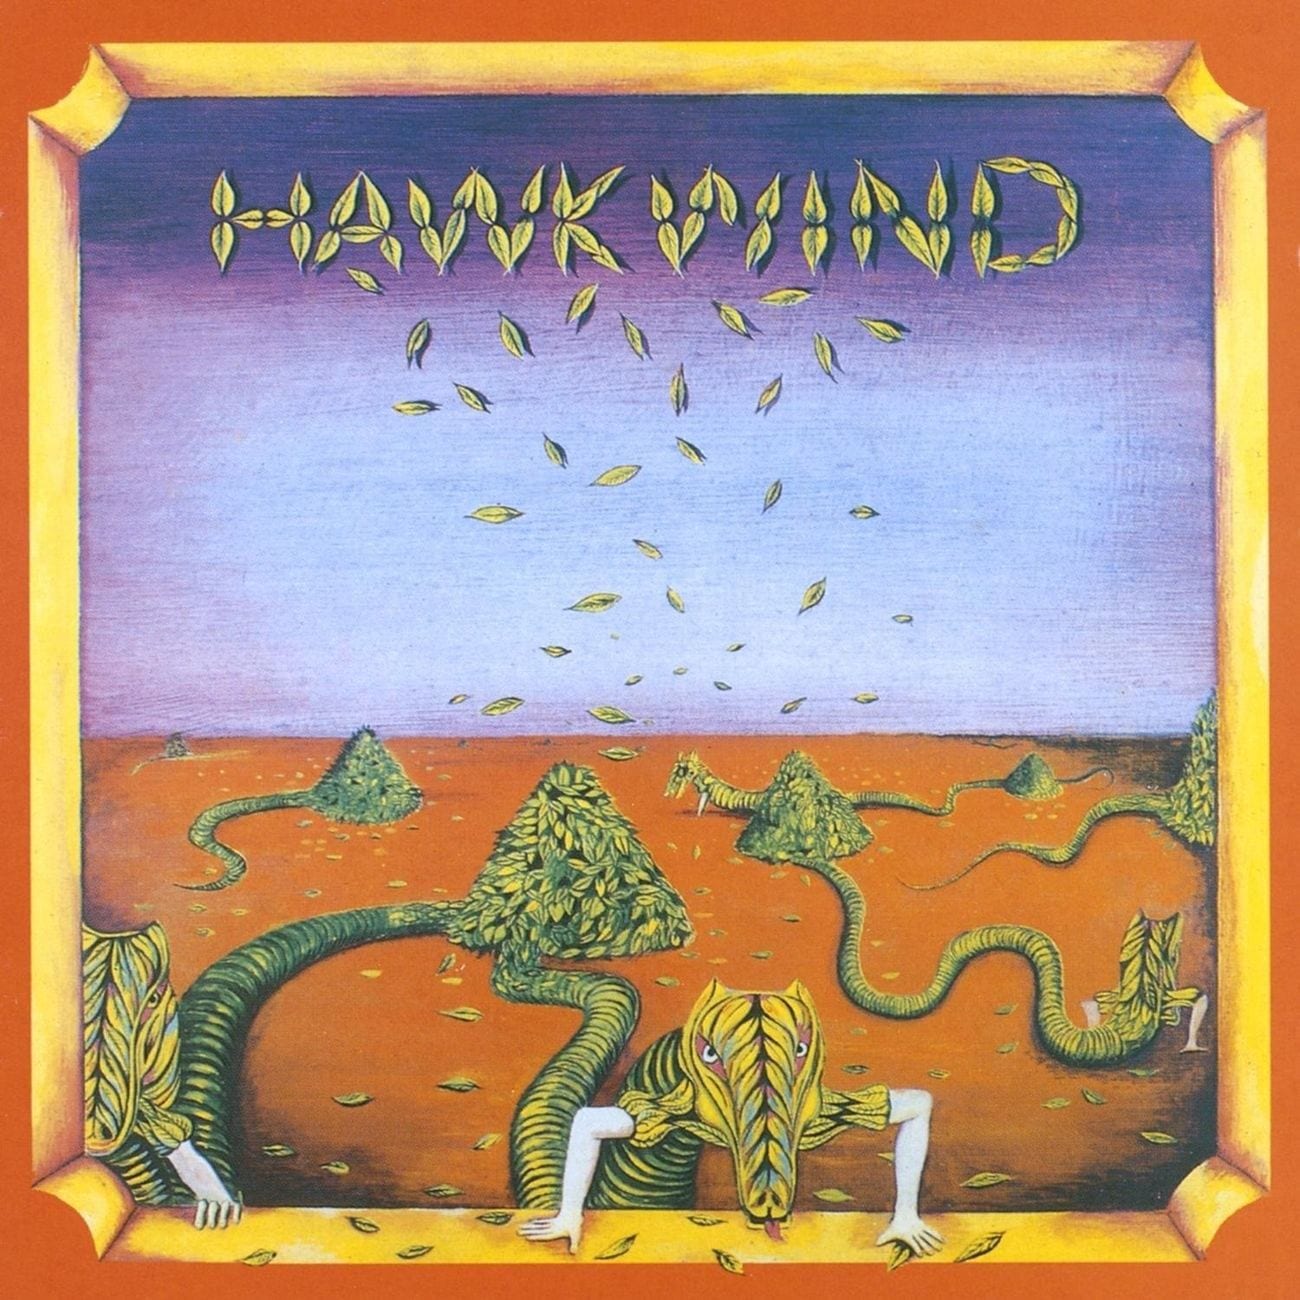 How Hawkwind’s First Voyage Helped Spearhead Space Rock 50 Years Ago